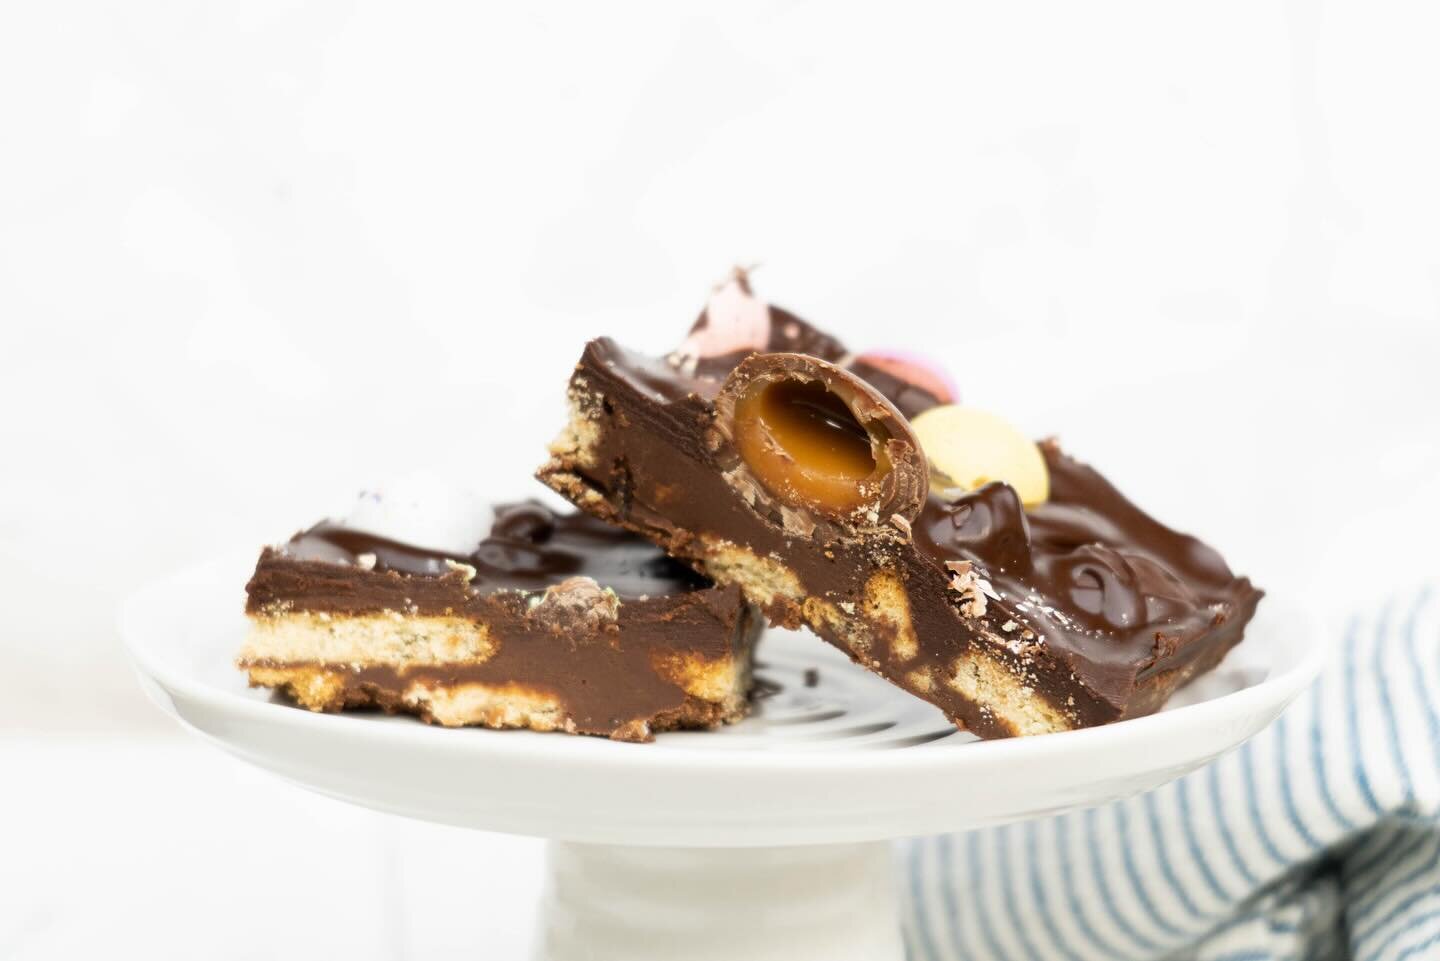 Tiffin is a sort of refrigerator cake, a dense, chocolatey, no-bake confection. Not exactly like an American style icebox cake, which tends to have a fluffier filling to hold it together. Tiffin is from Scotland and it has a dense, ganach-y sort of c